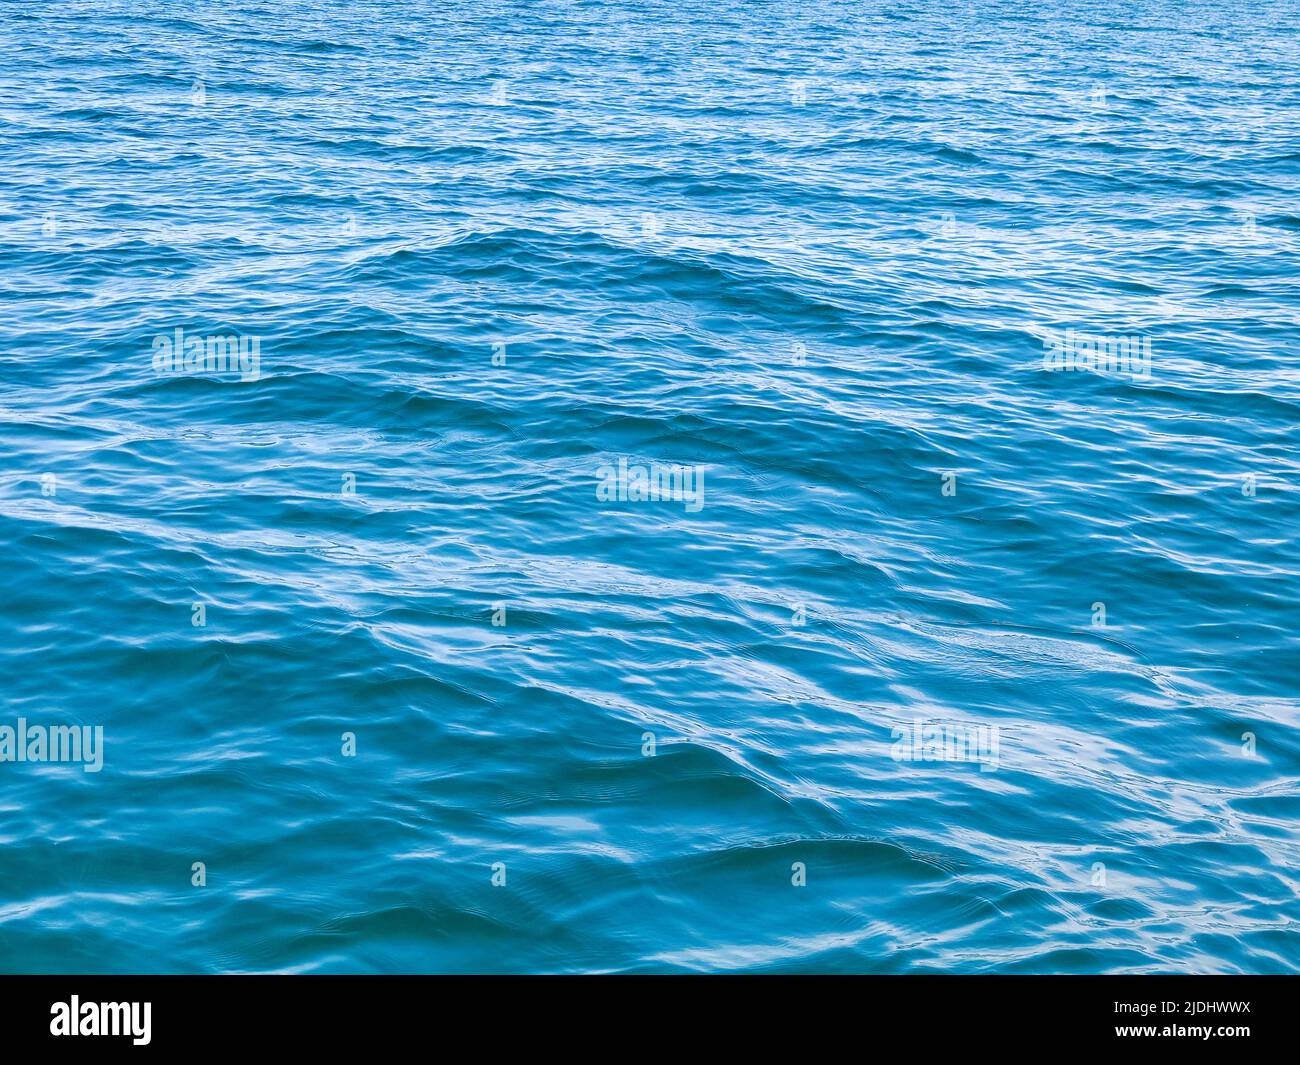 Lake Michigan blue freshwater with small waves Stock Photo